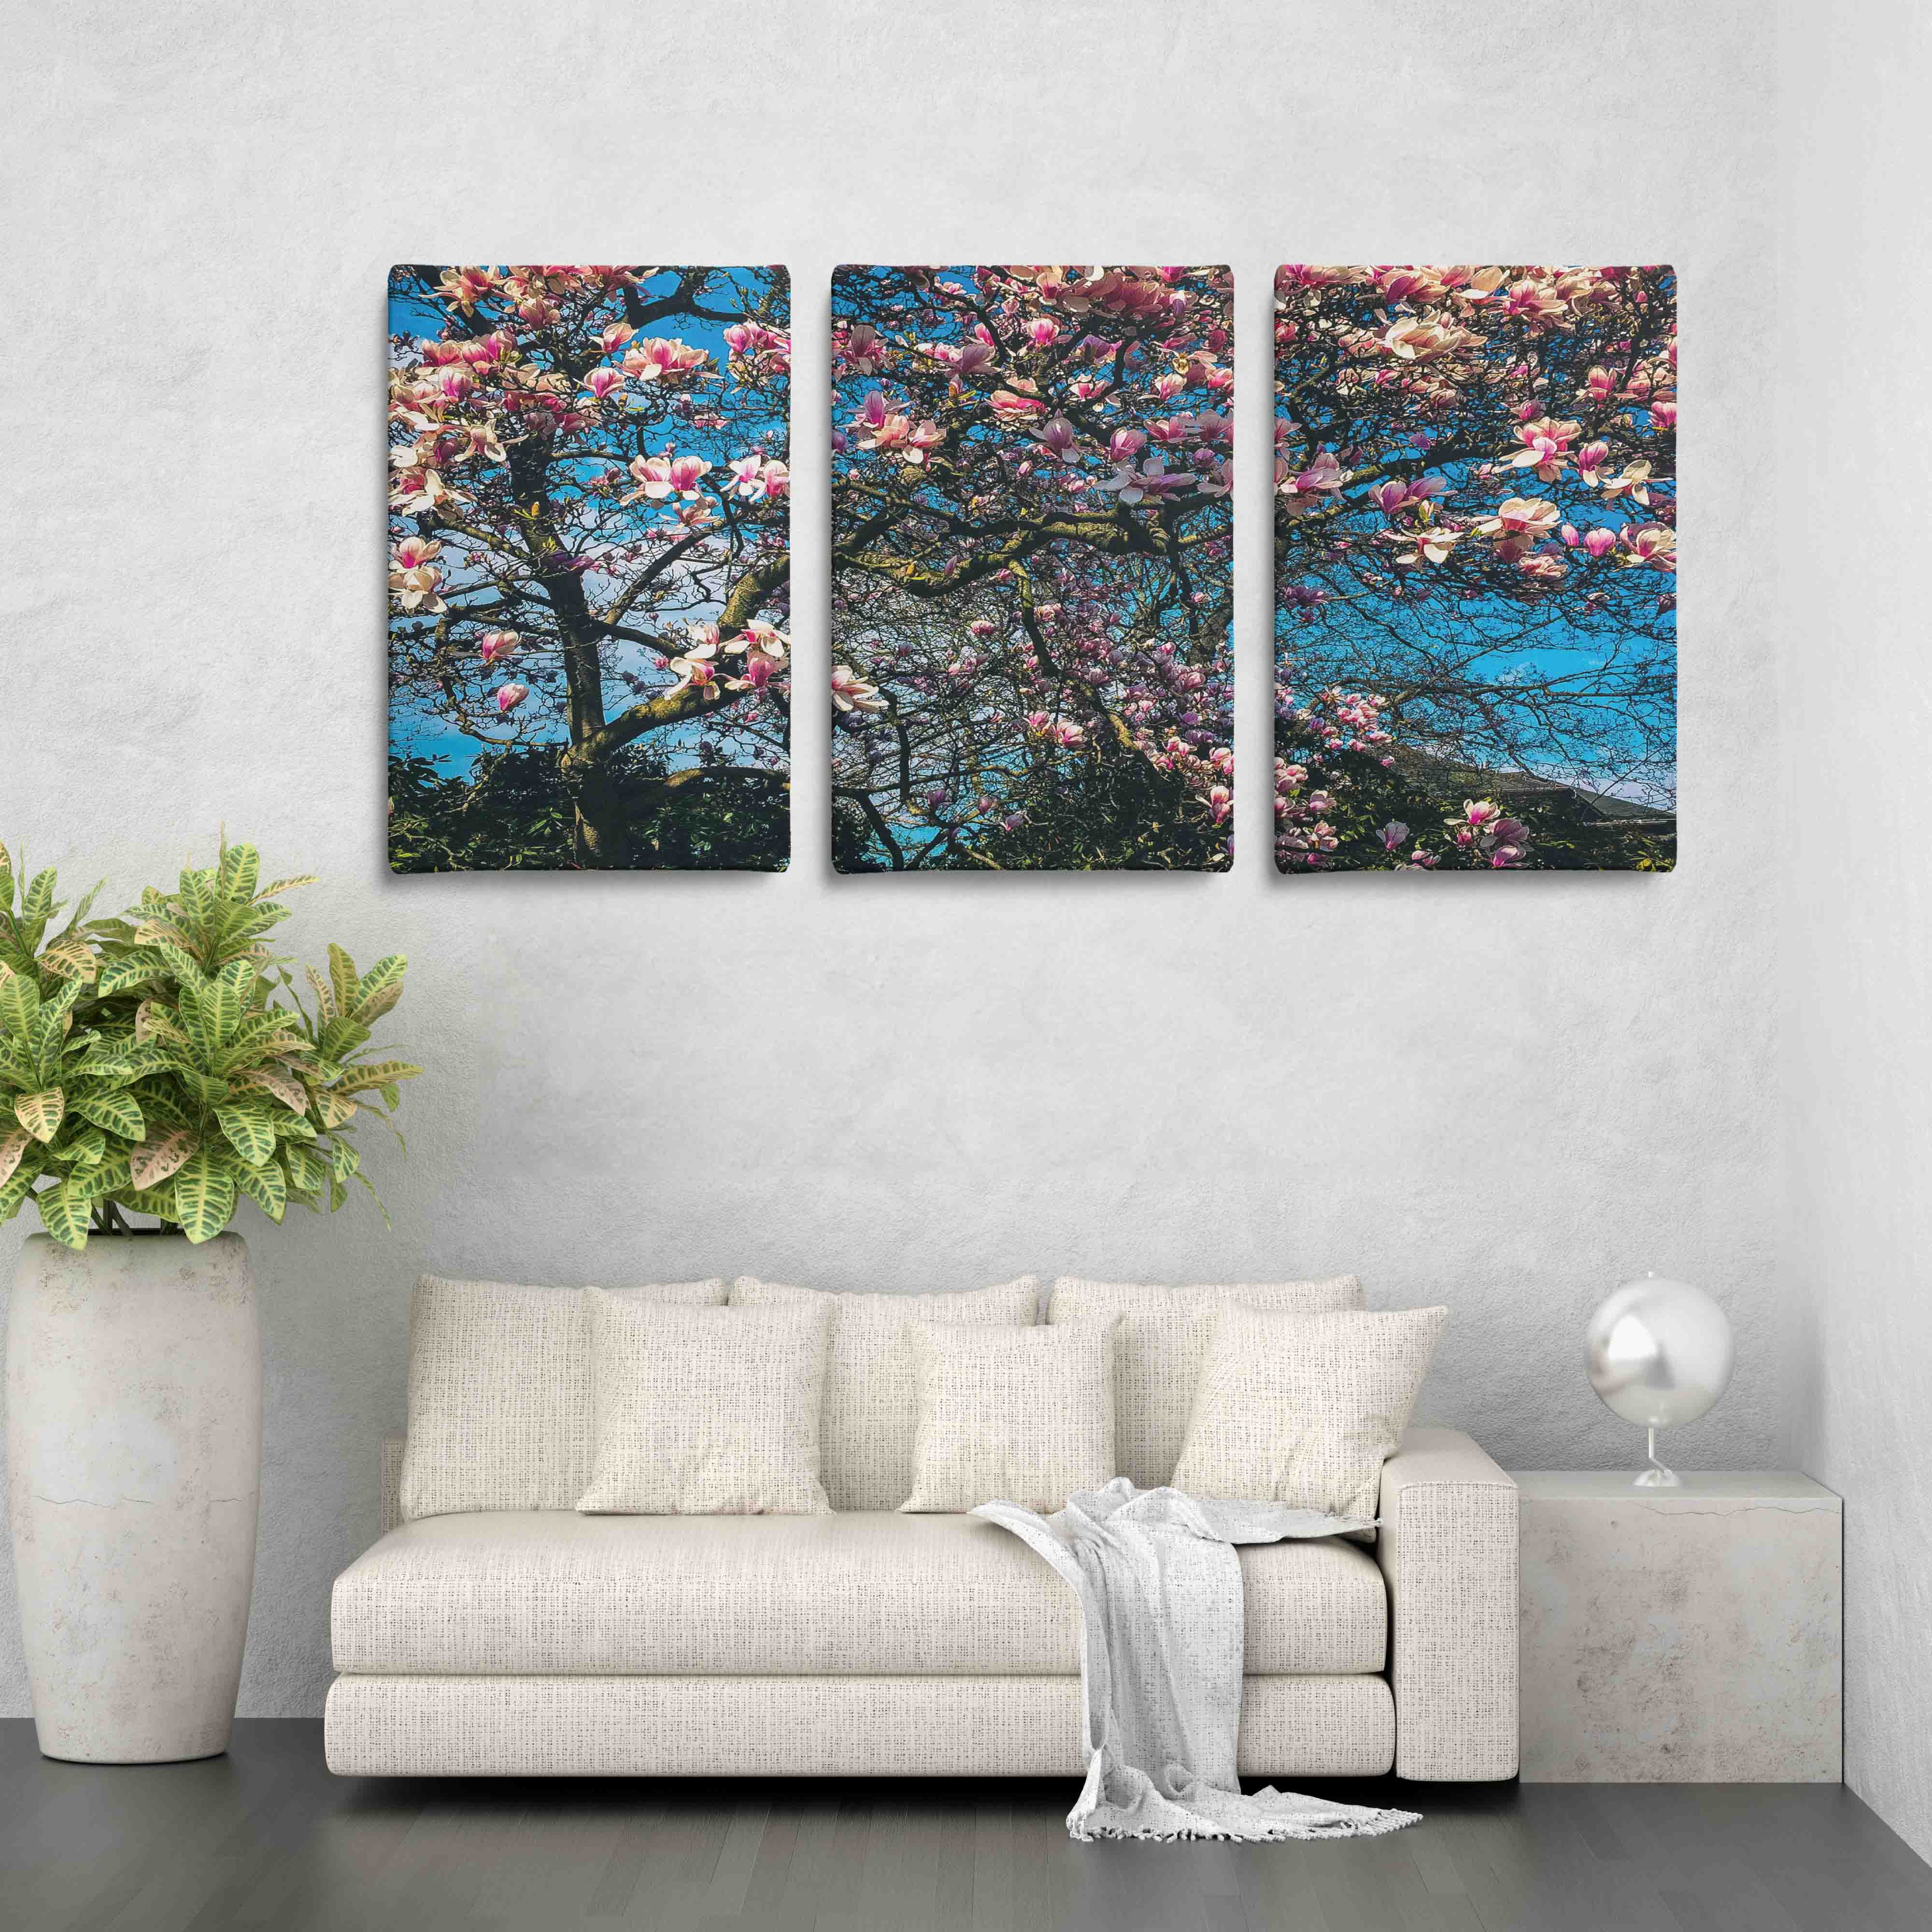 Large-sized vertical triptych canvas set featuring a segmented floral image, cascading elegantly across three panels to fill and enhance any space with dynamic and eye-catching wall art.